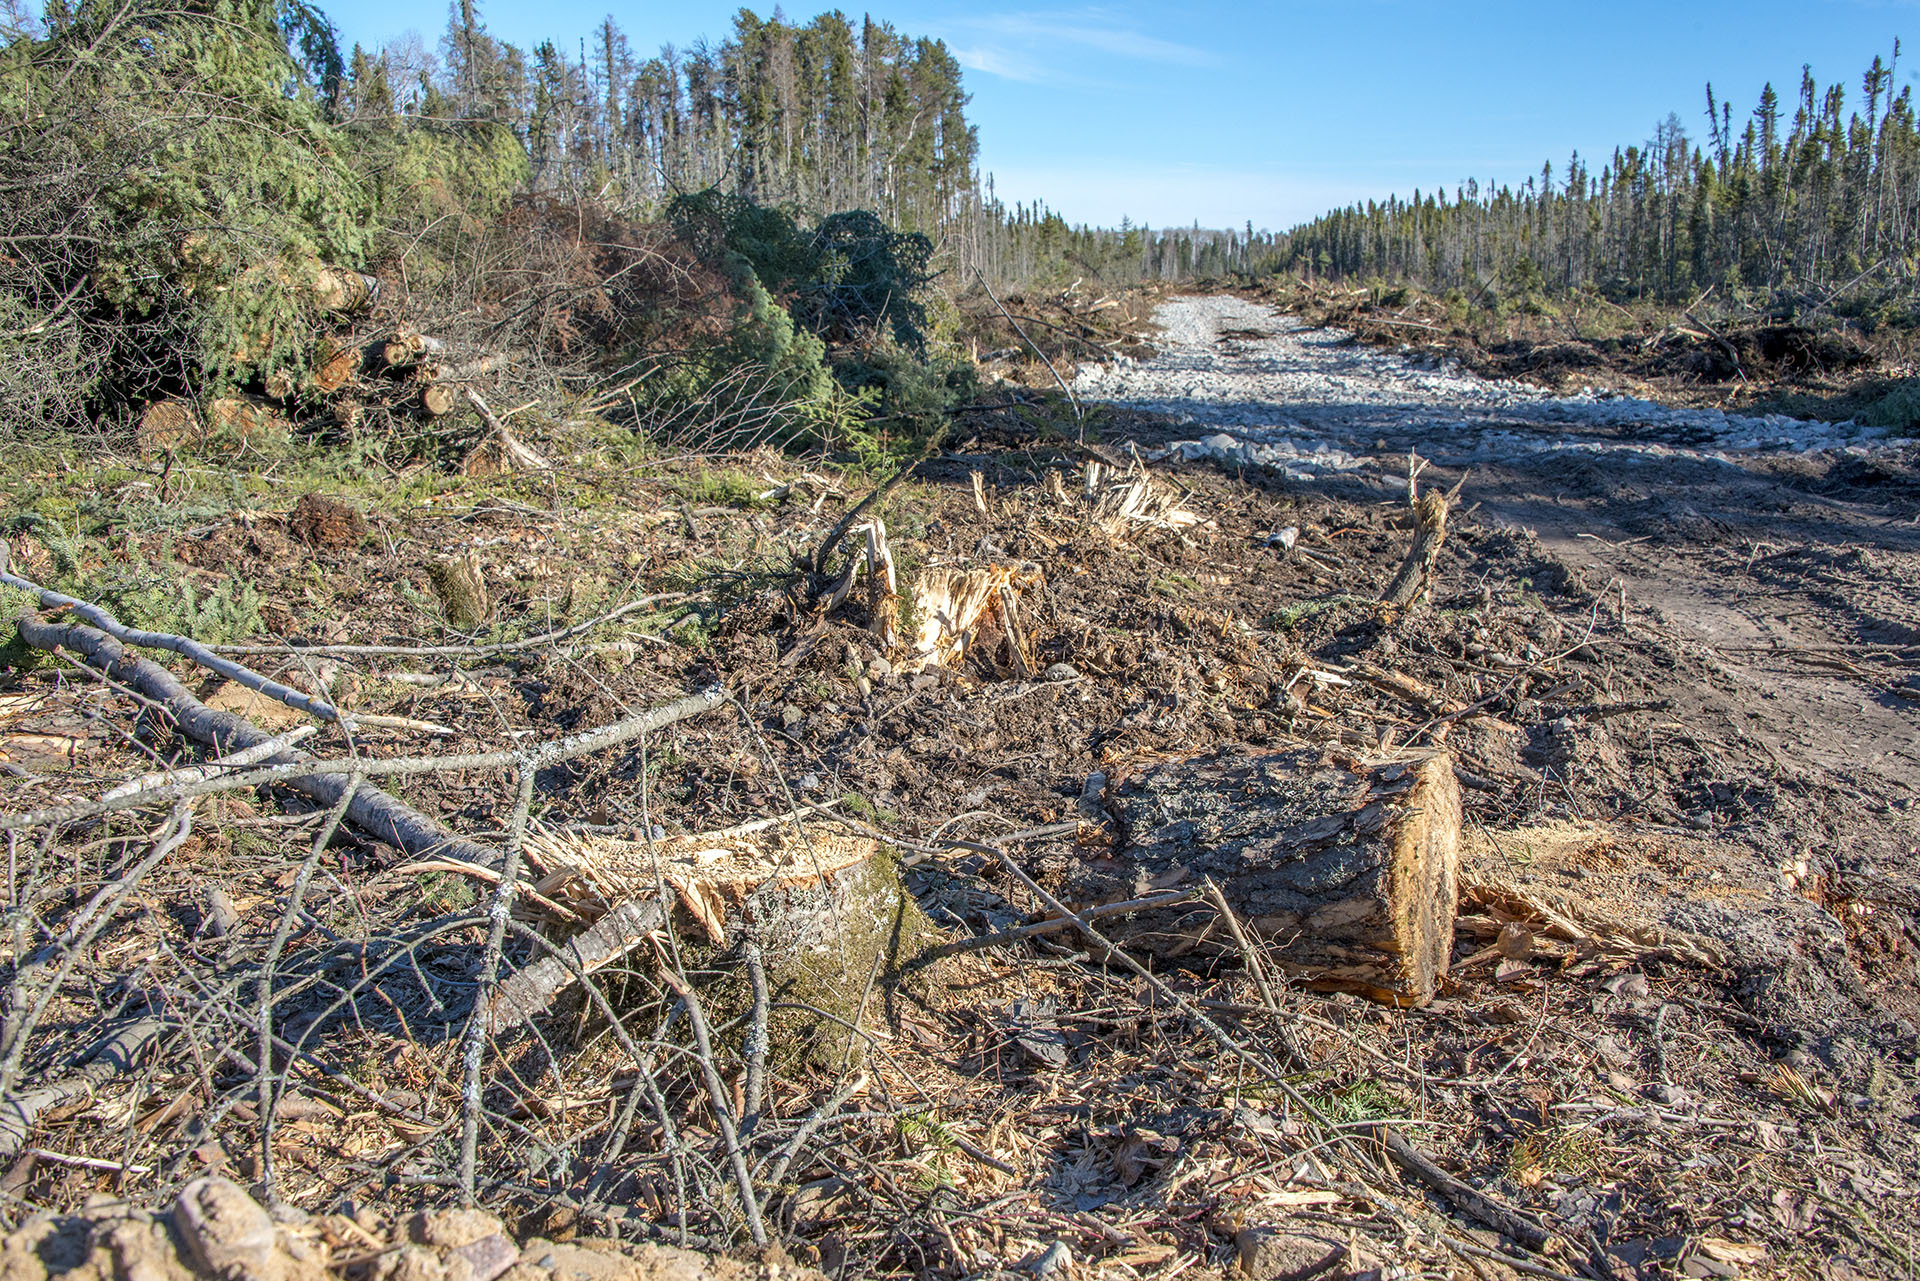 The Manitoba government’s assessment process allowed clearcutting before an environment license was even issued